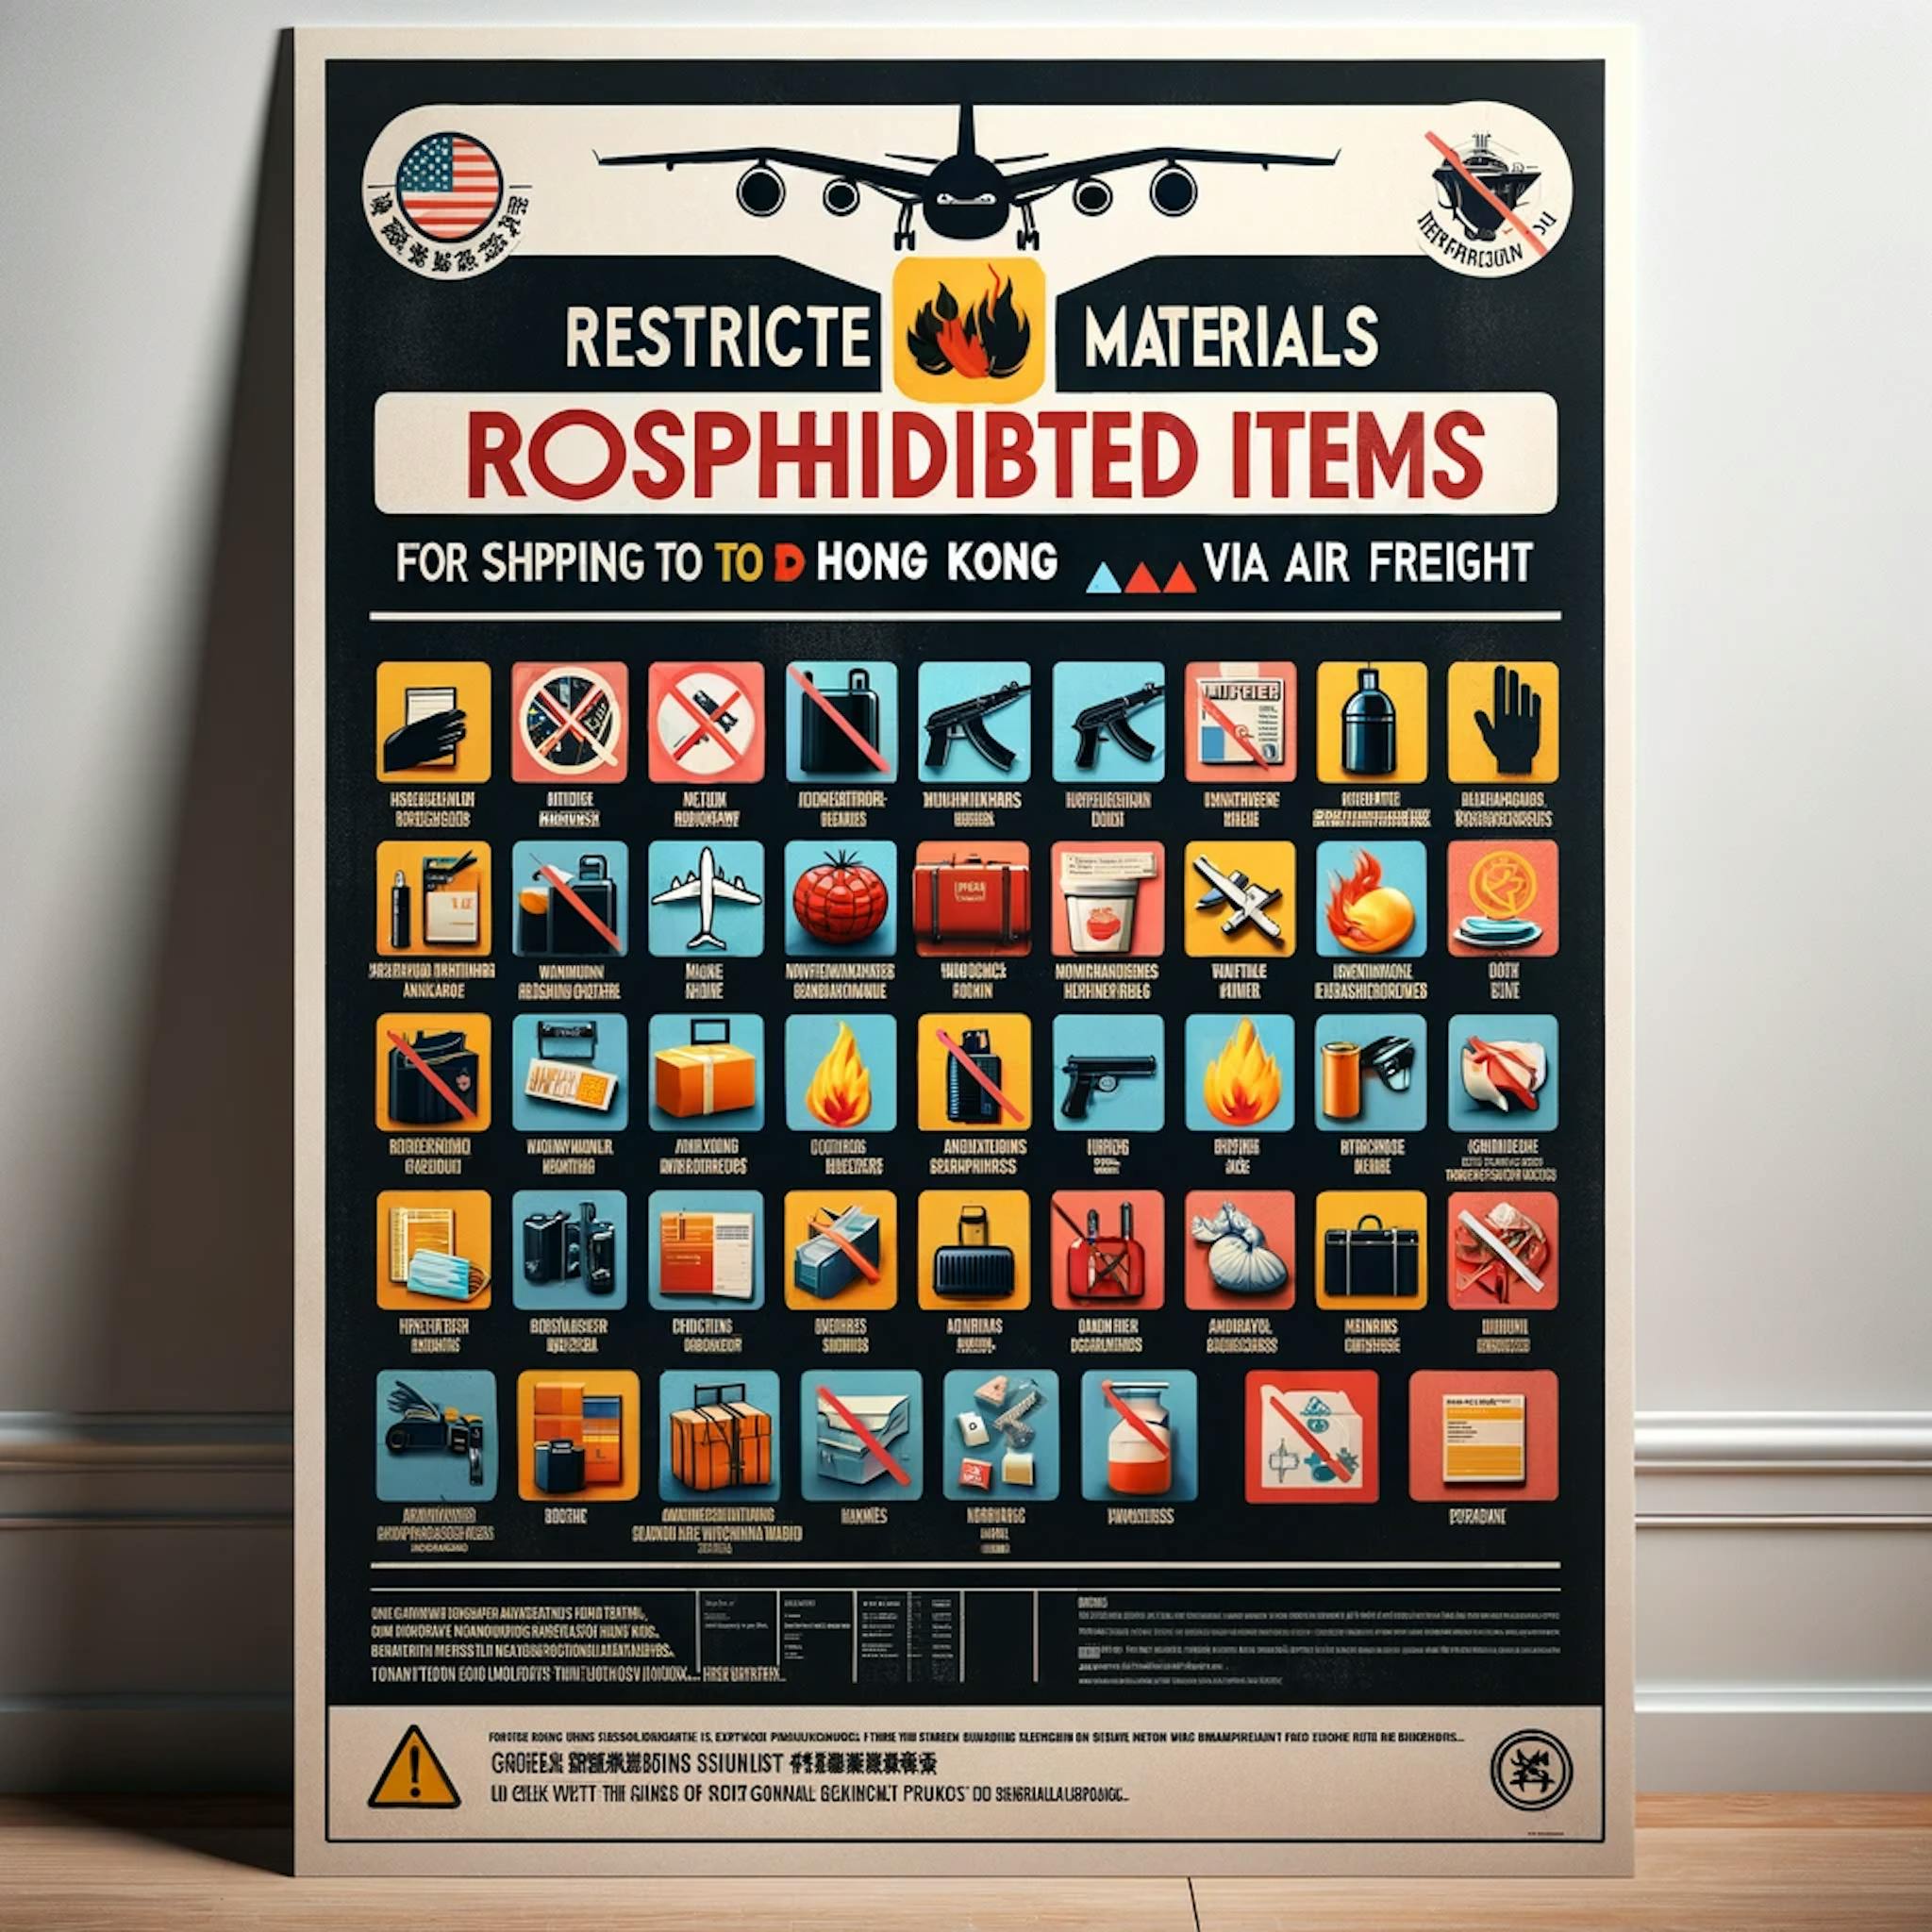 an informative poster about restricted and prohibited items for shipping to Hong Kong via air freight.